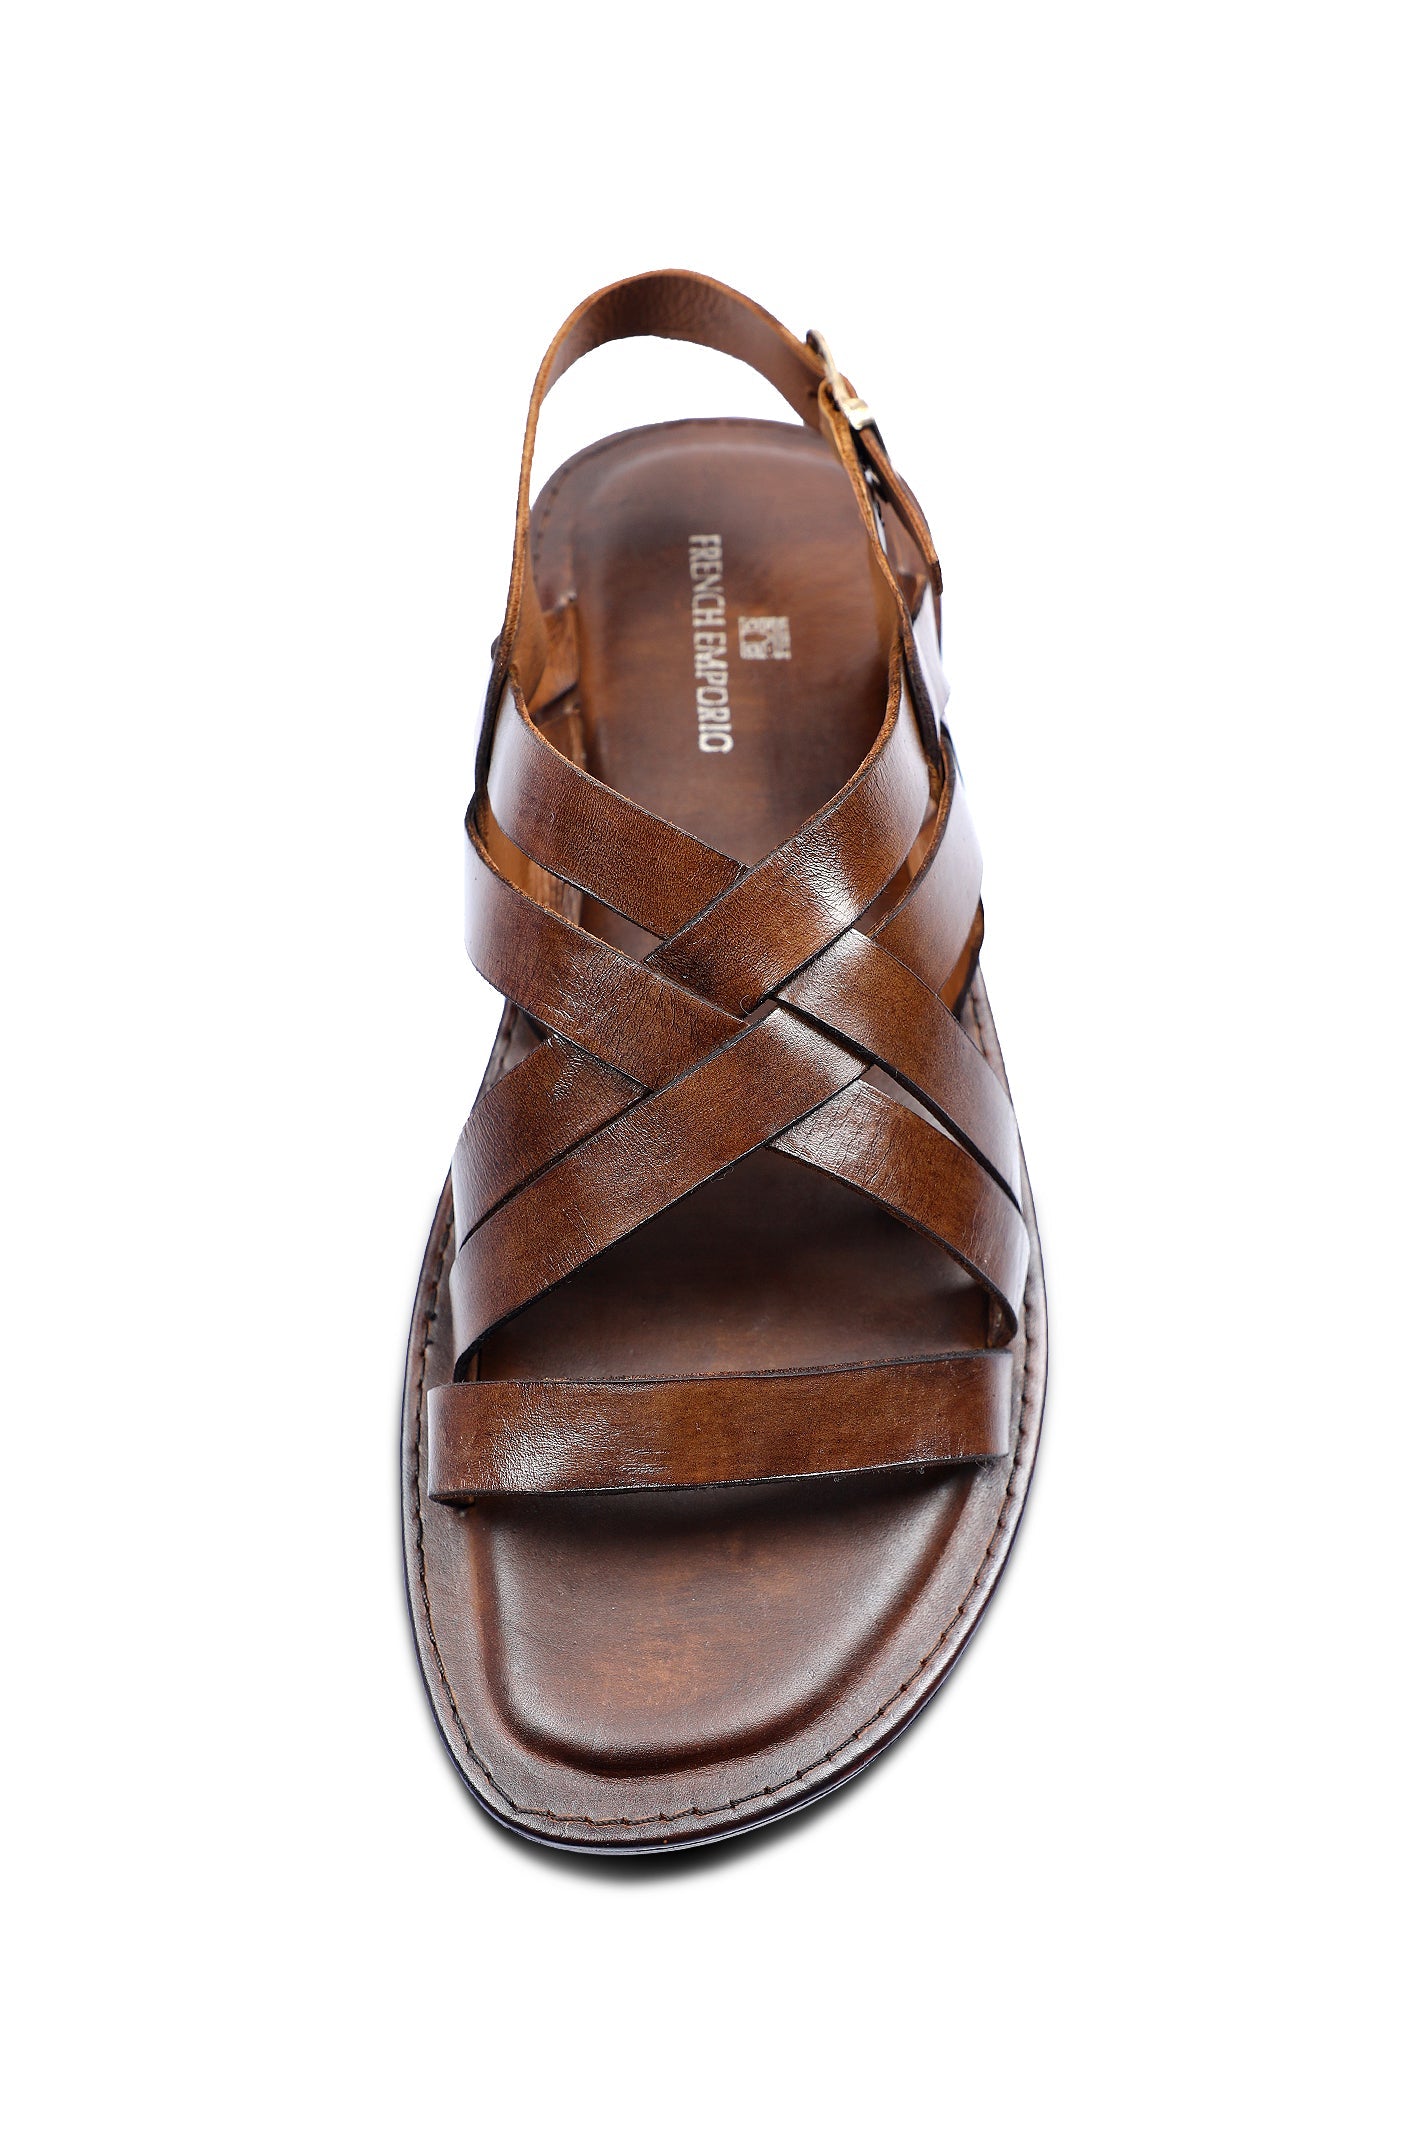 French Emporio Mens Sandal SKU: SLD-0036-COFFEE - Diners